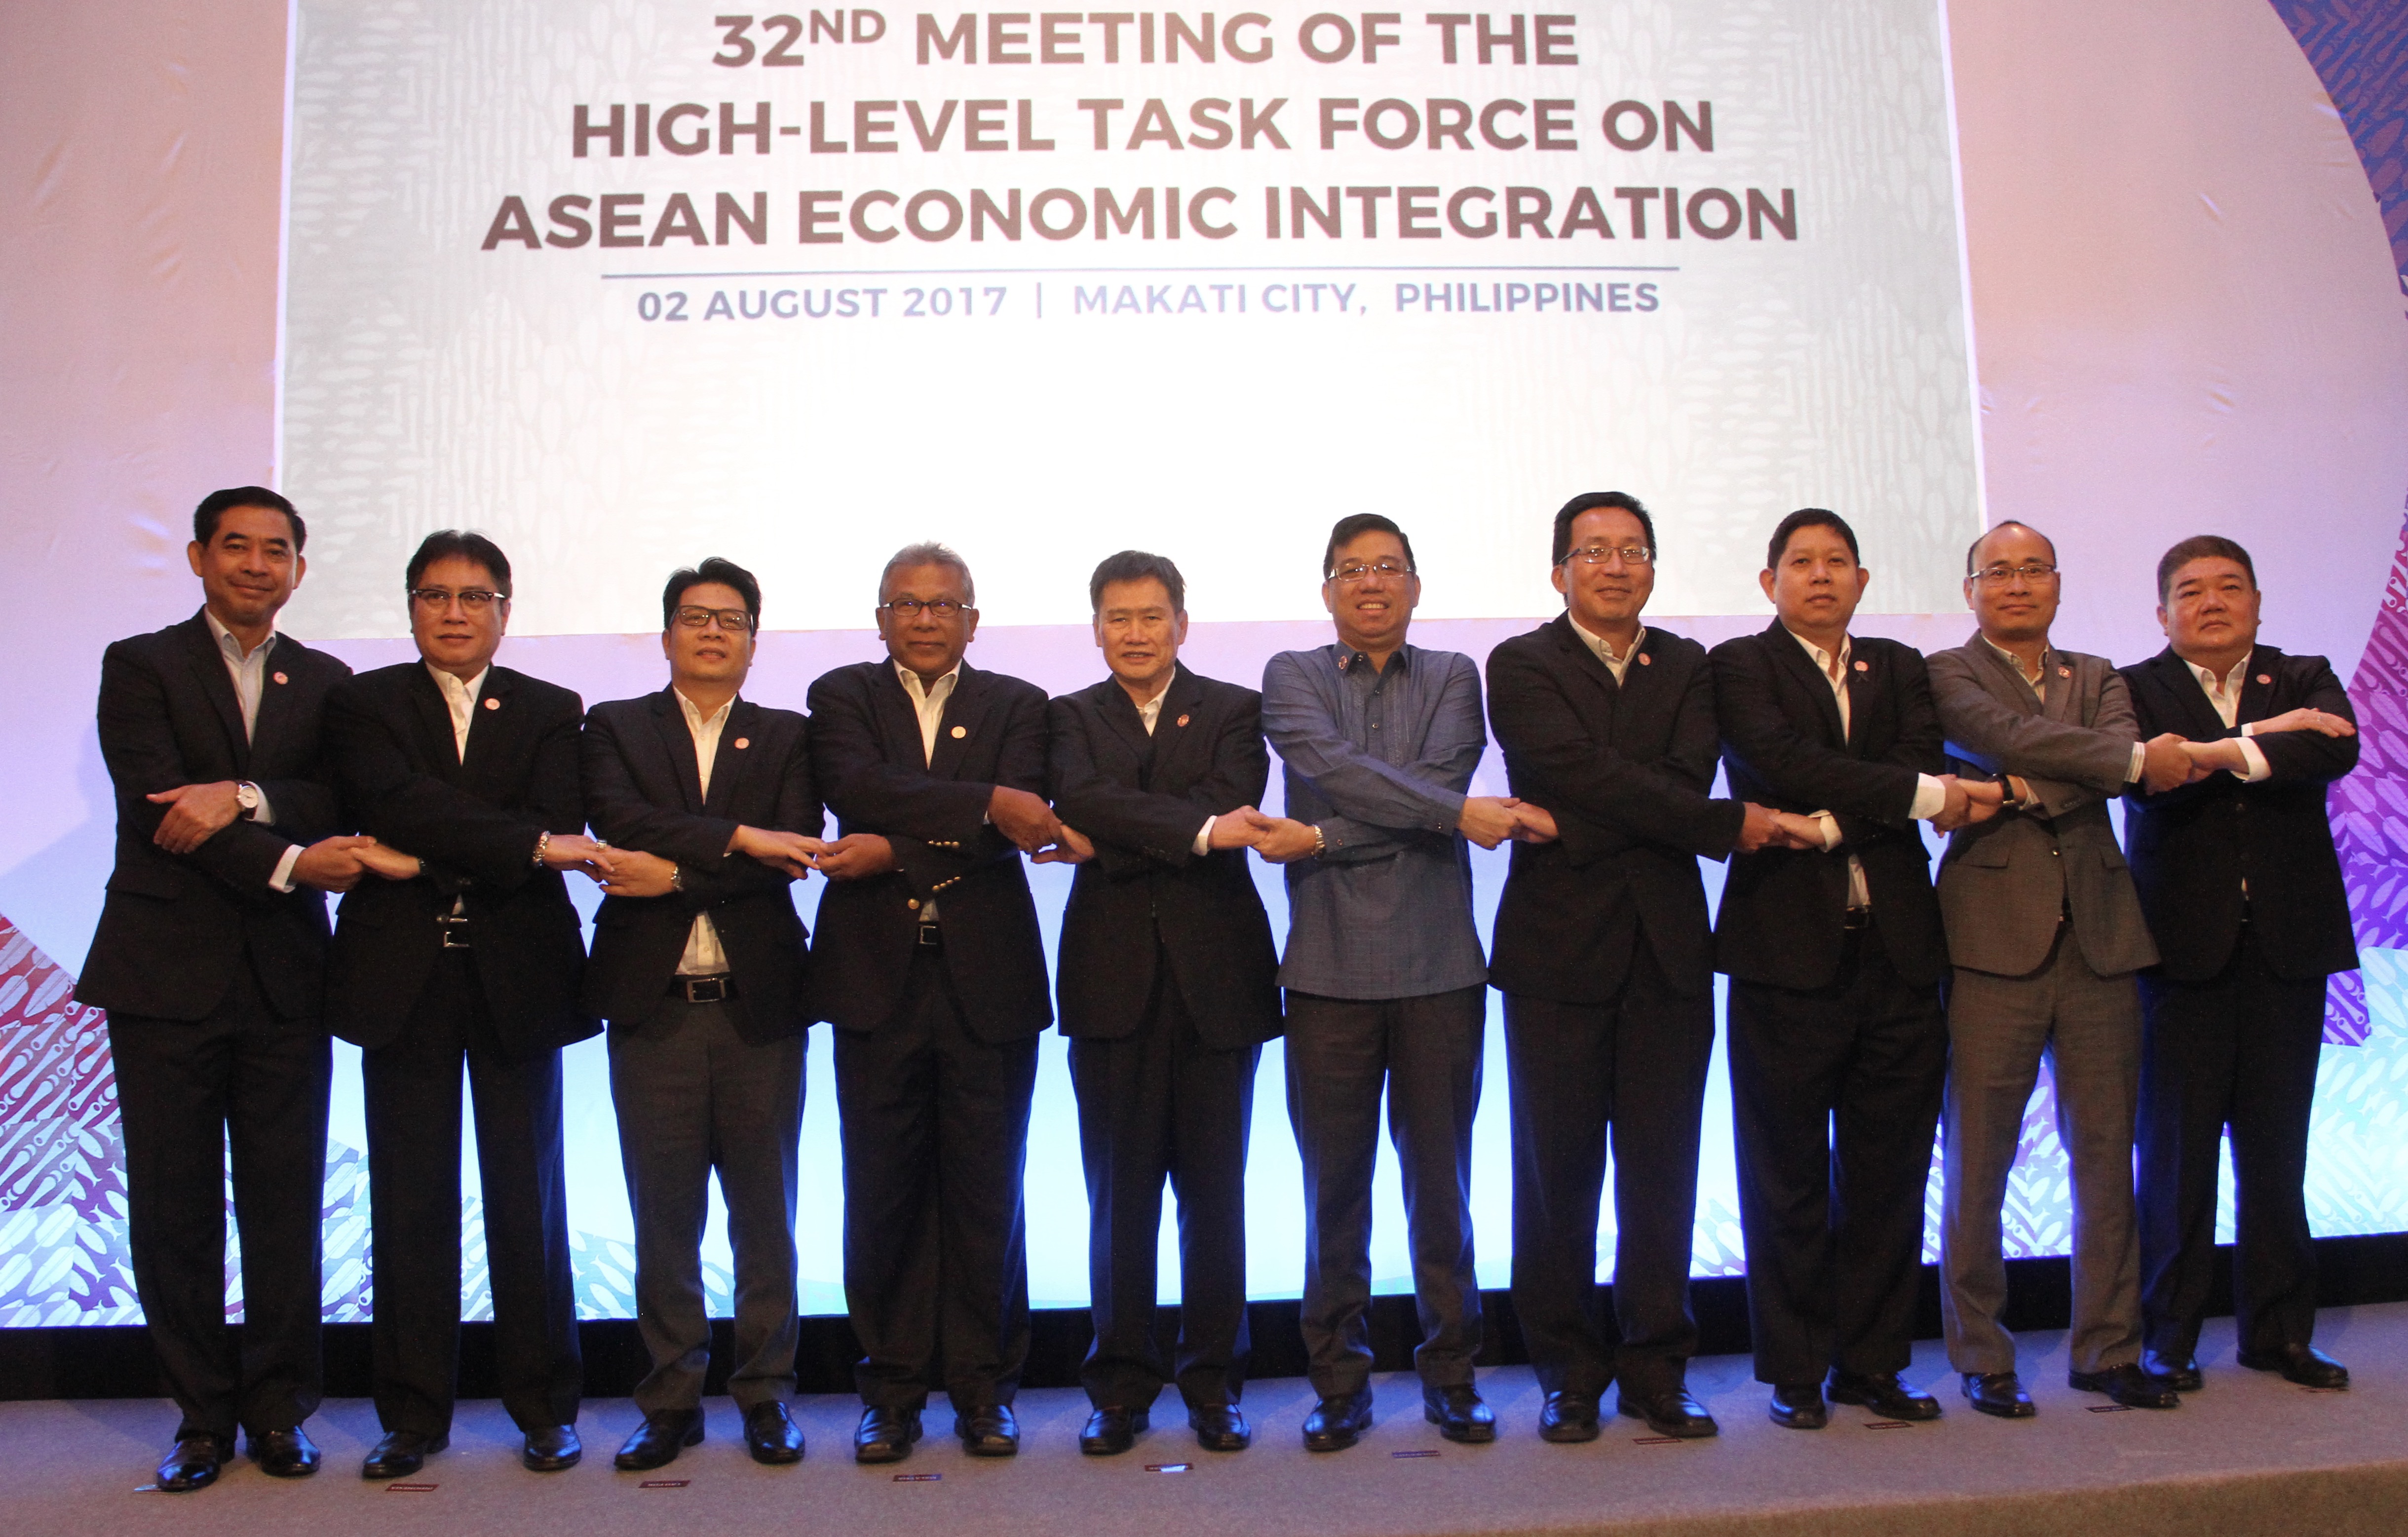 ASEAN Task Force recommends boosting intra-regional trade and investment